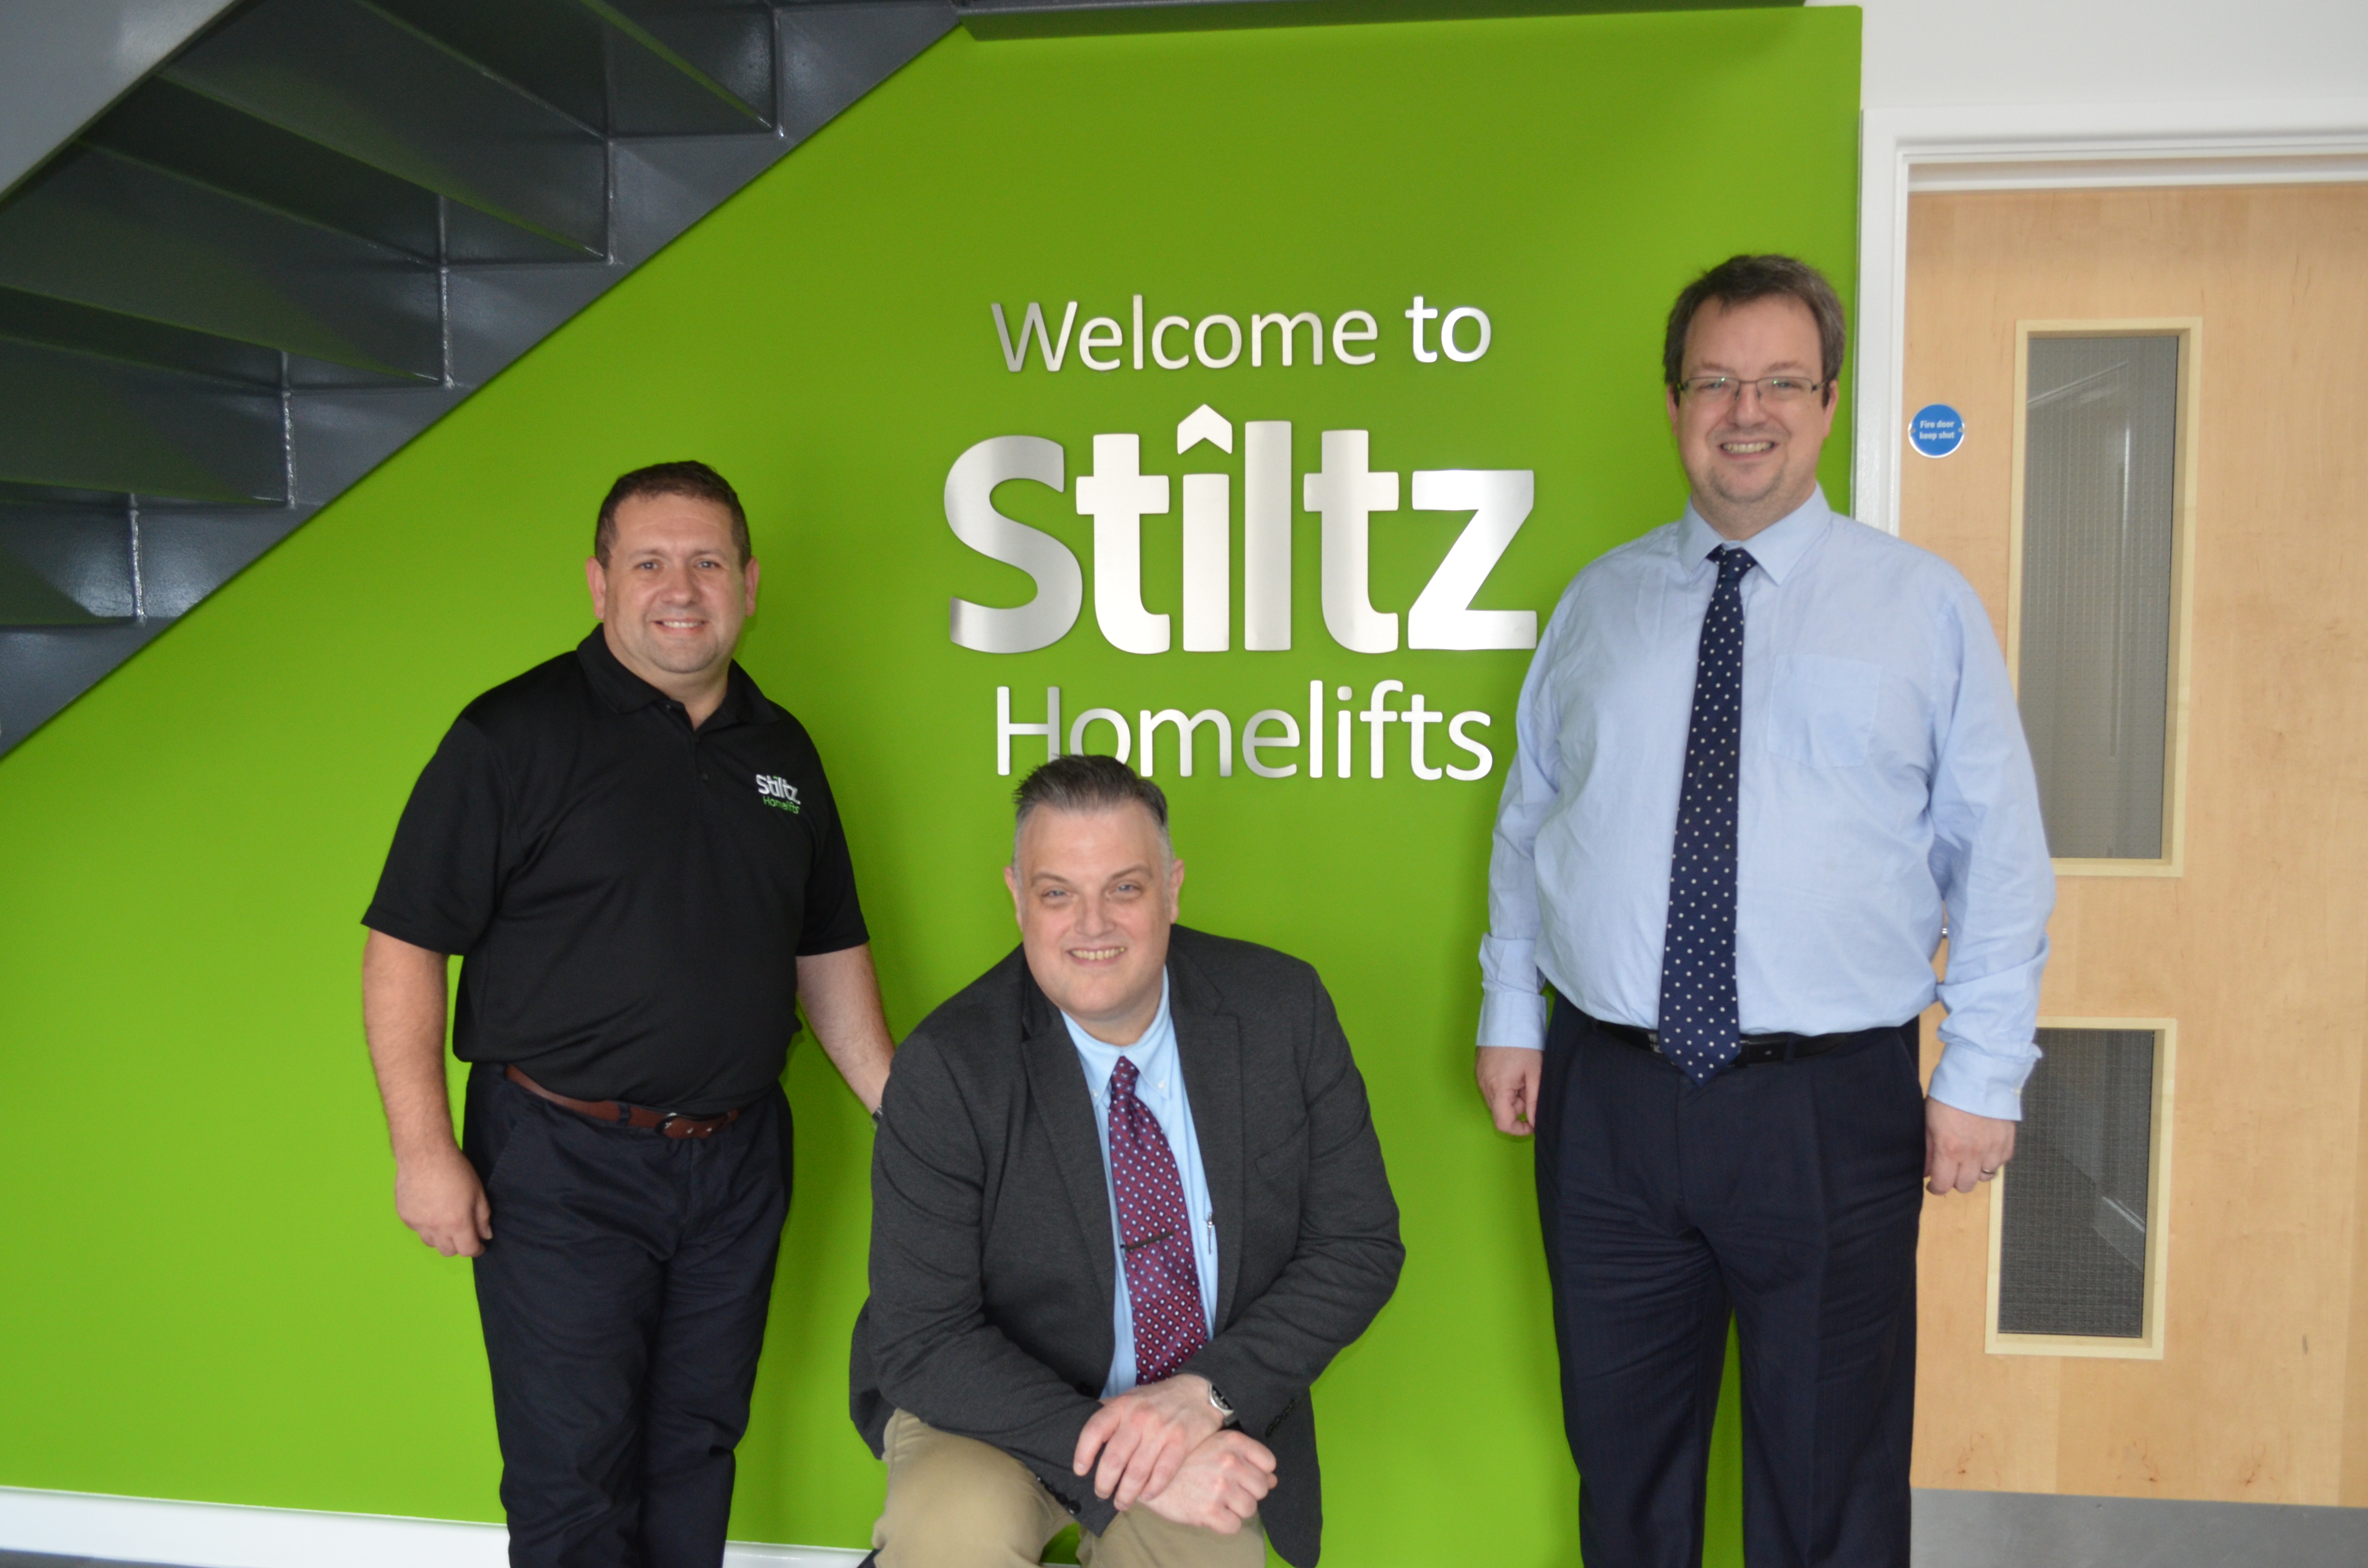 Mike on a tour of Stiltz Homelifts with UK Sales Director Gino and Bill Lee from British Healthcare Trades Association